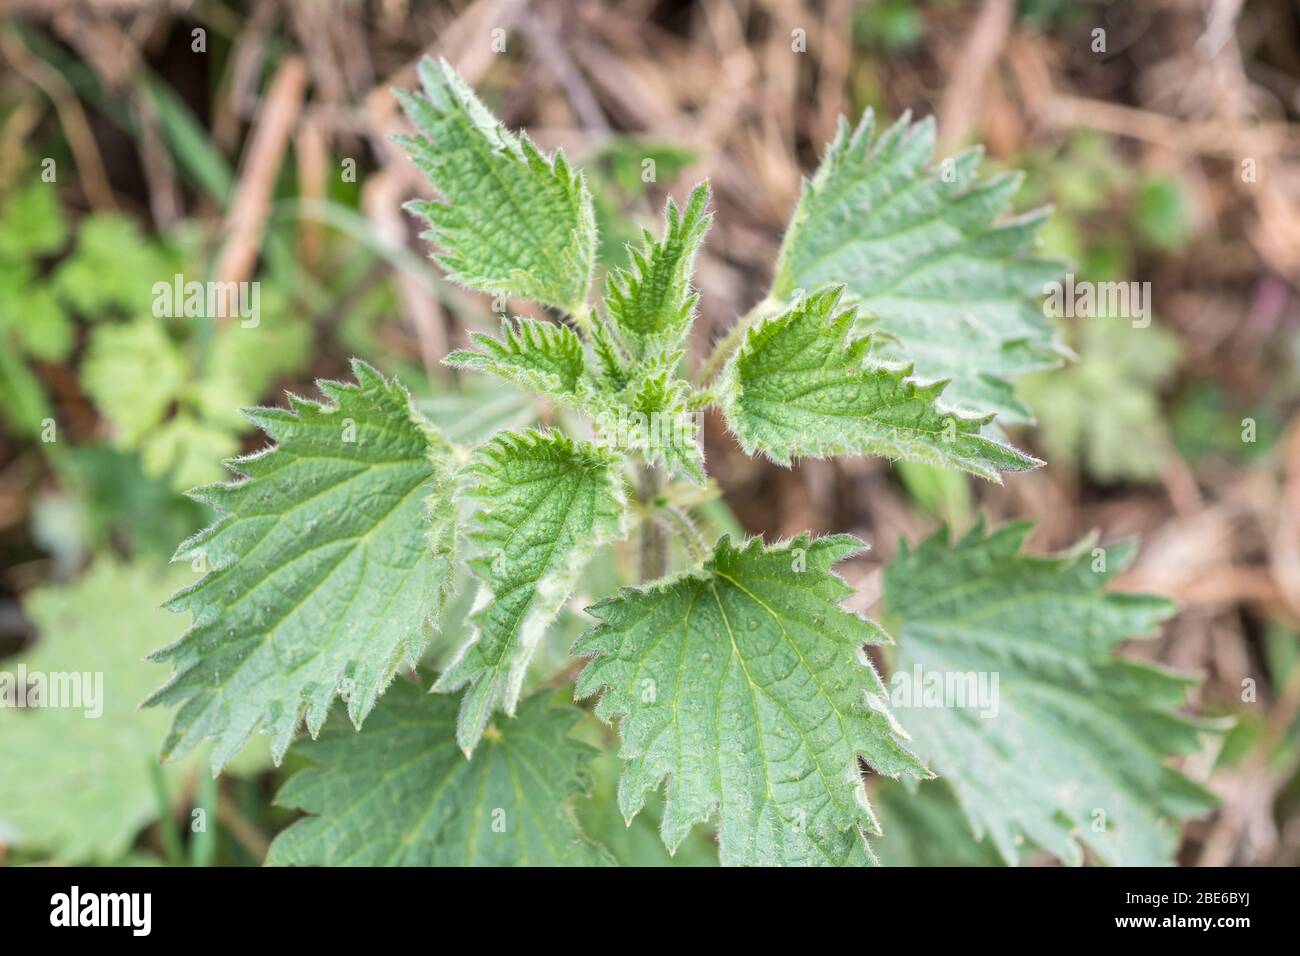 Unusual specimen of a three-leaved Stinging Nettle / Urtica dioica plant in a hedgerow. Rare hybrid but occasionally found. Plant variation & mutation Stock Photo